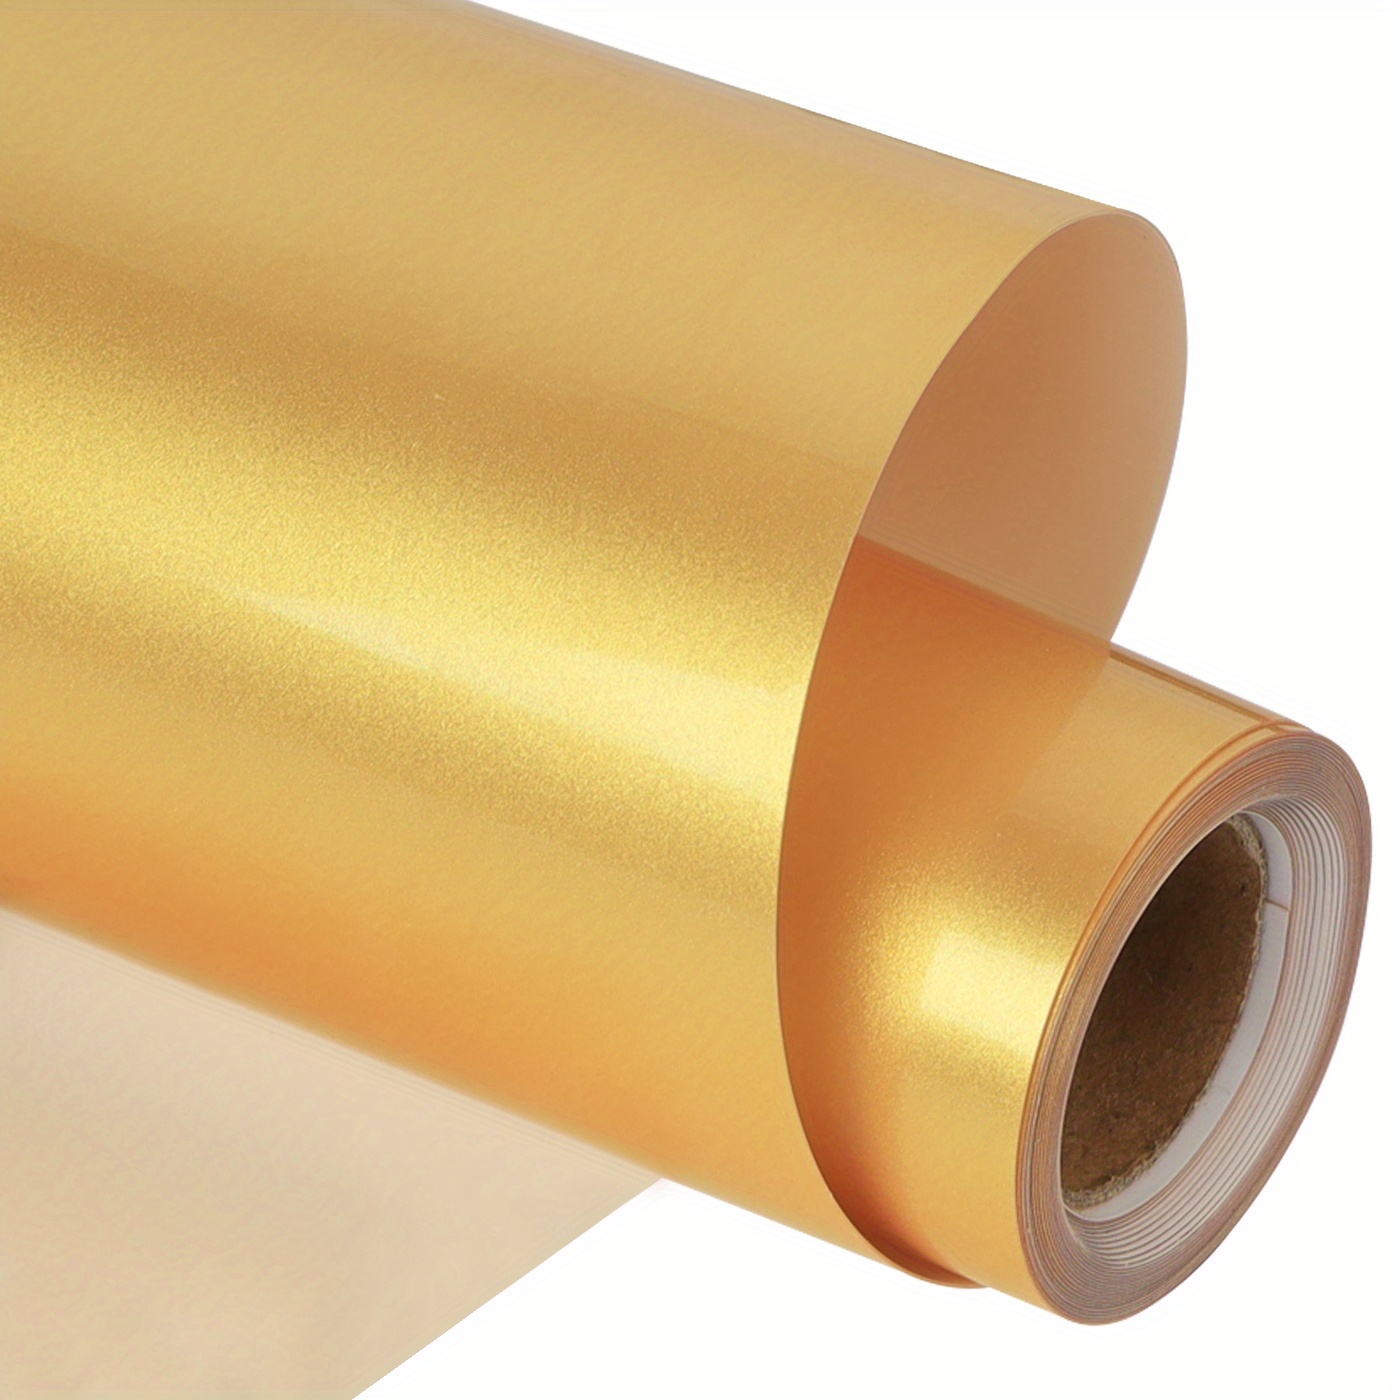  Gold Heat Transfer Vinyl Roll, 12 x 8' Gold HTV Vinyl, Glossy  Adhesive Gold Iron on Vinyl - Easy to Weed & Cut Vinyl HTV for T-Shirt  (Gold, 12 inch x